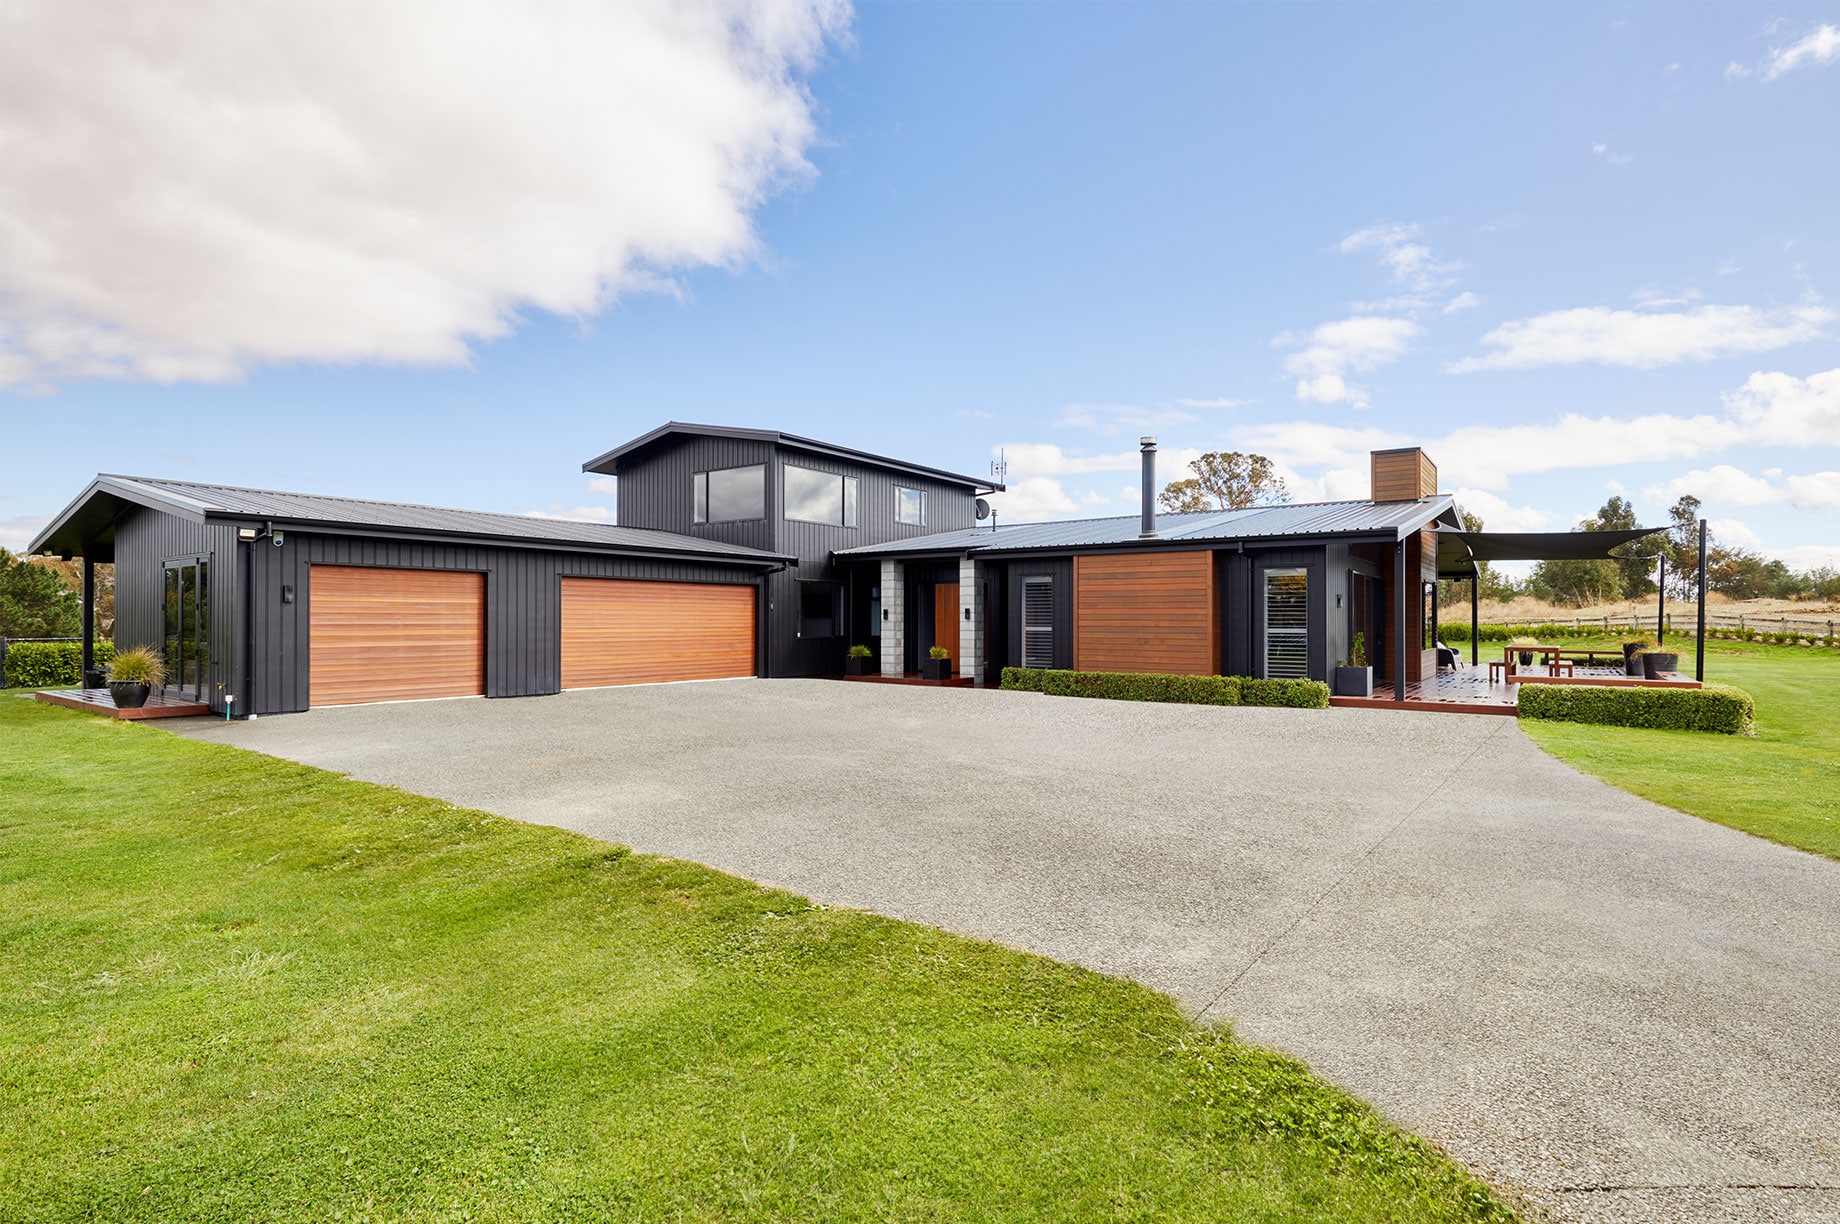 Black and wooden rural home exterior